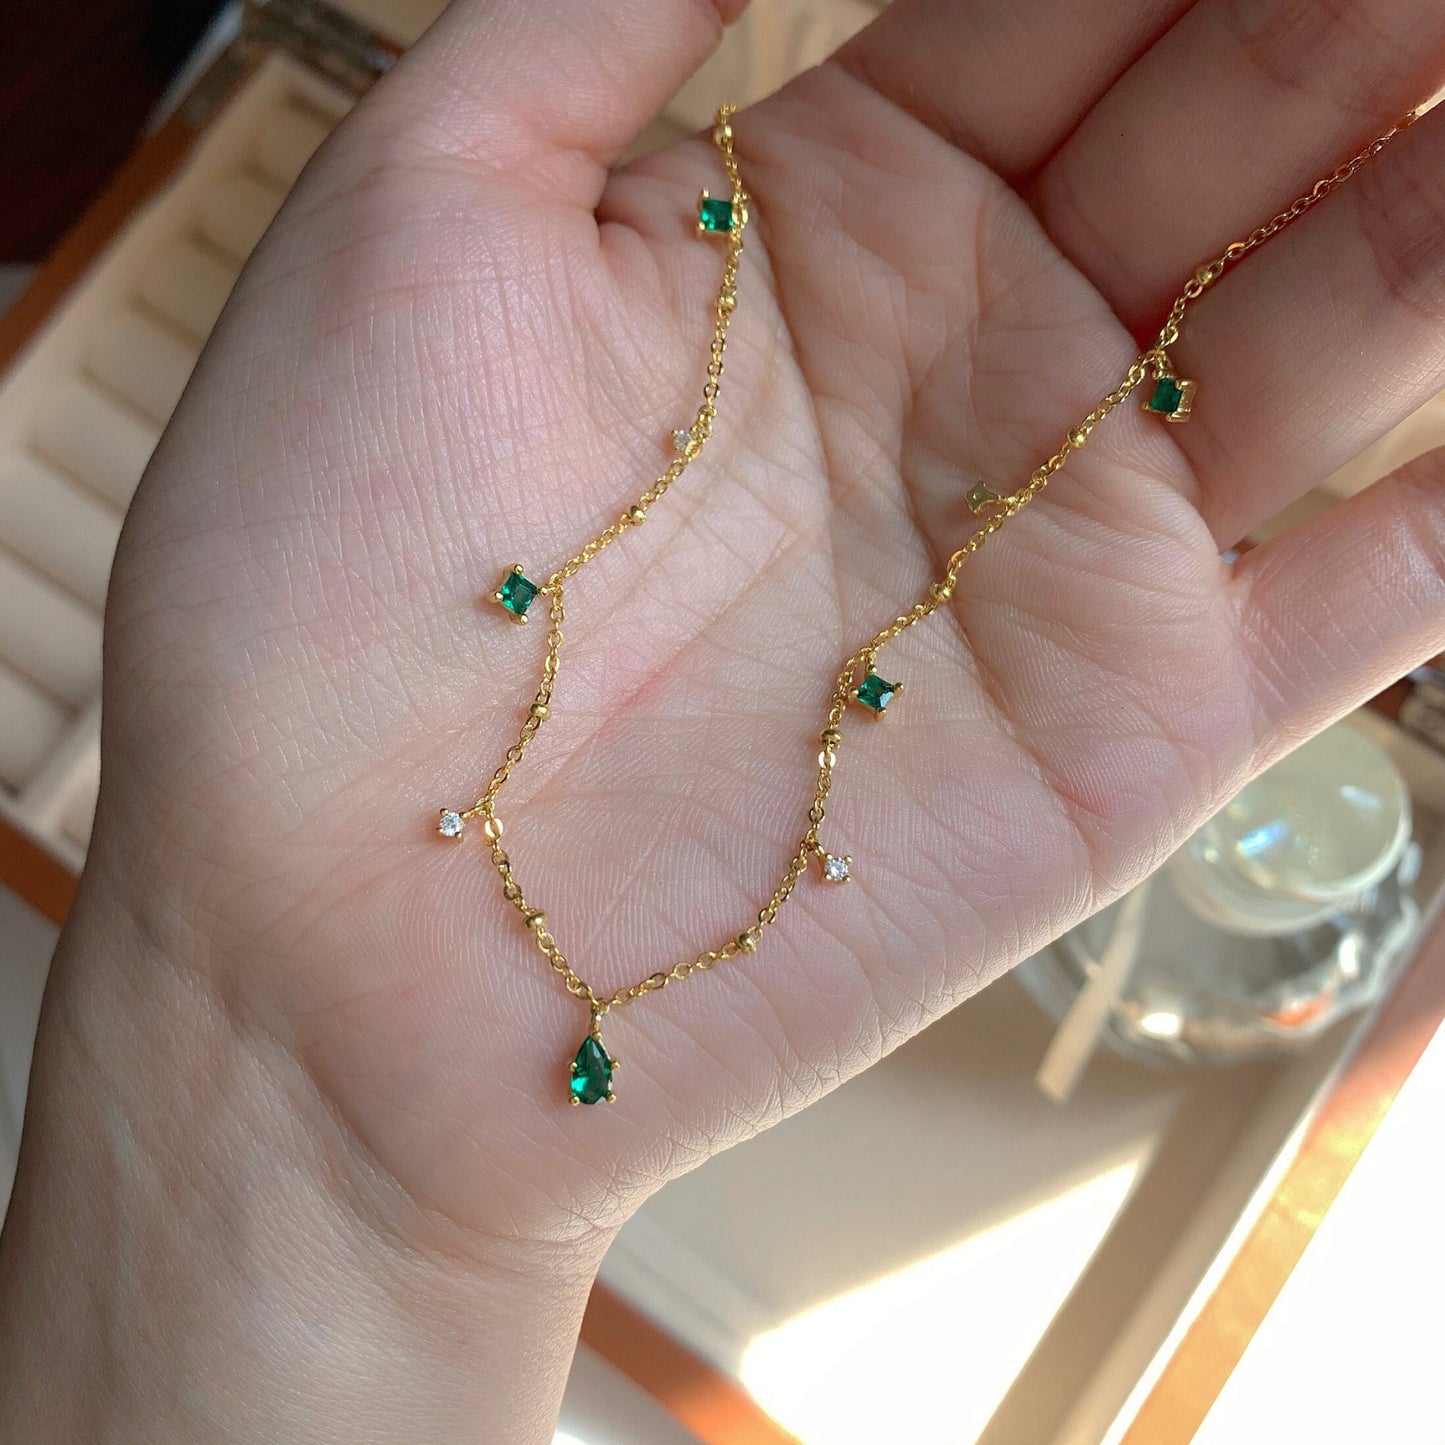 Emerald Droplet Necklace, Multi Drop Necklace, Emerald Green Charm Necklace, Layering 14K Gold-filled/925 Silver Necklace, Handmade Gifts